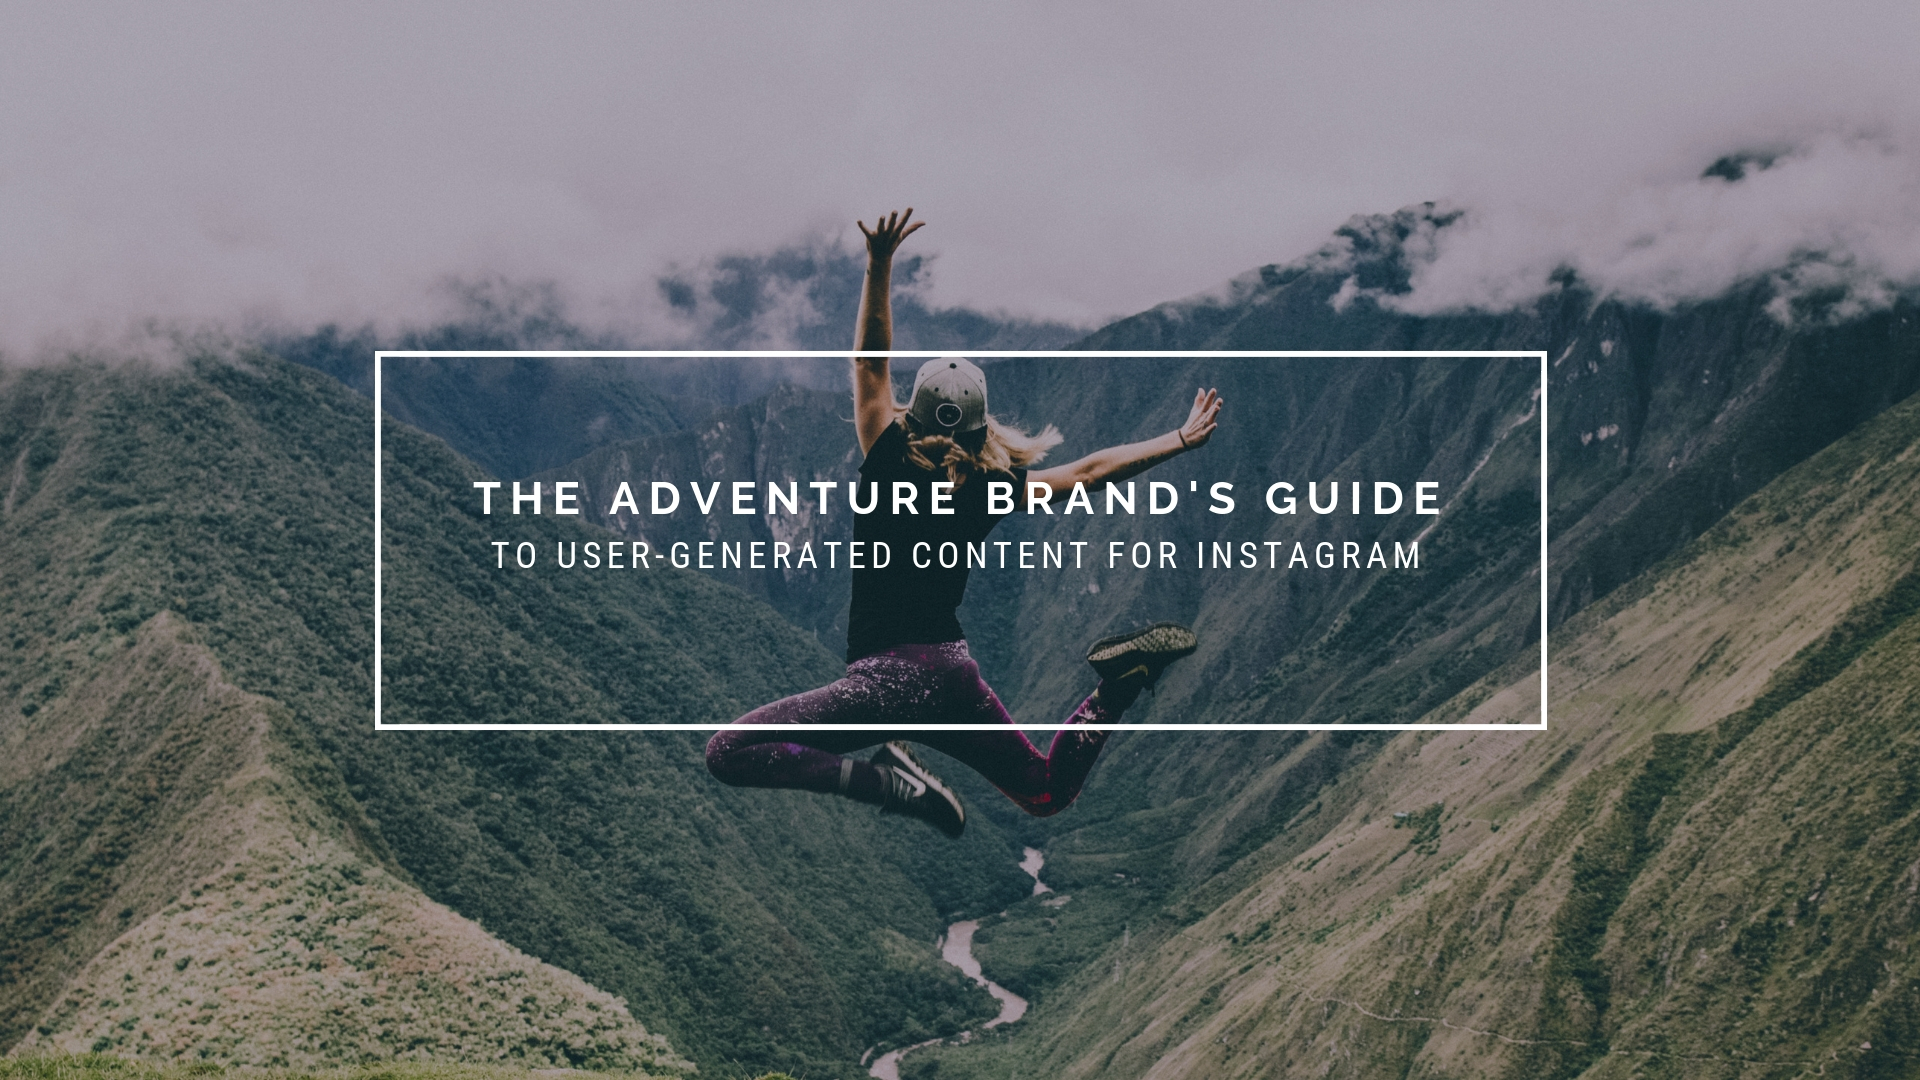 The Adventure Brand's Guide to User Generated Content on Instagram